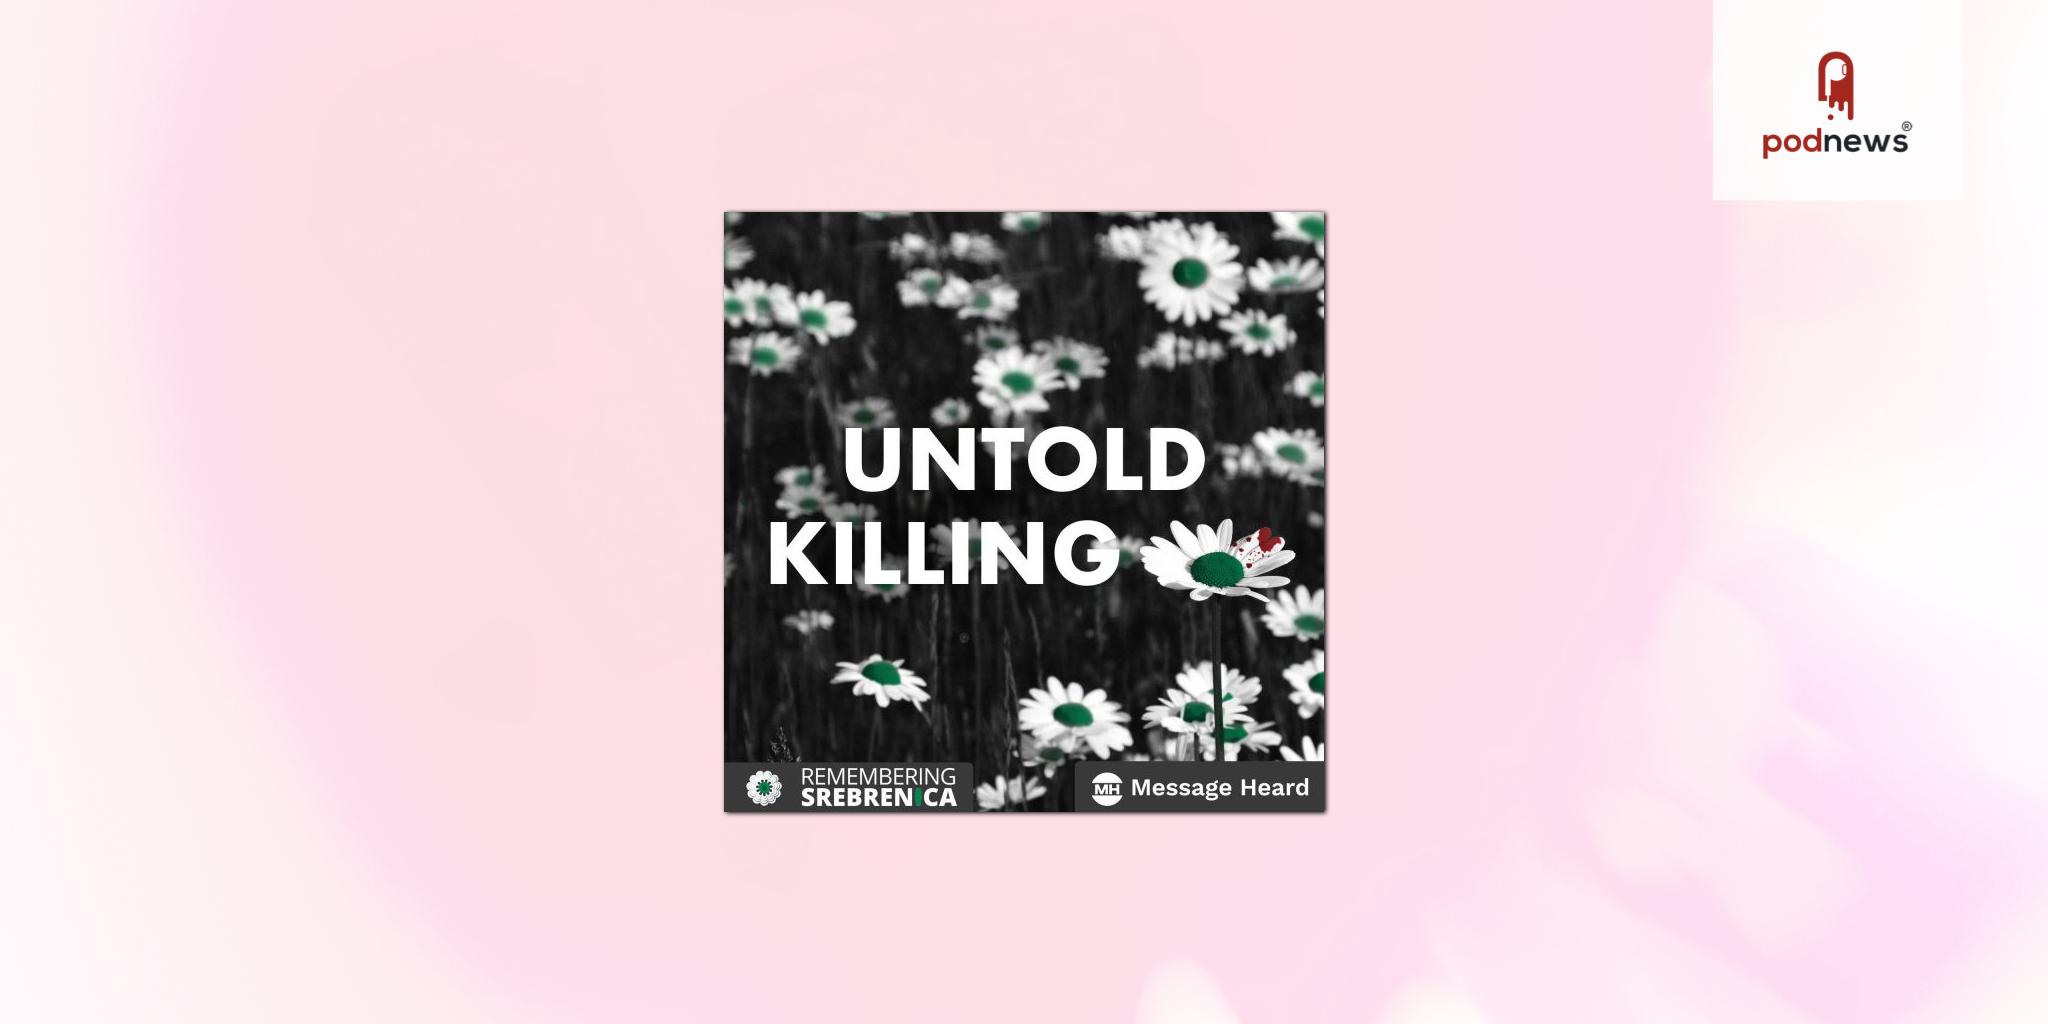 Untold Killing podcast returns, telling the story of the concentration camps in Prijedor, Bosnia